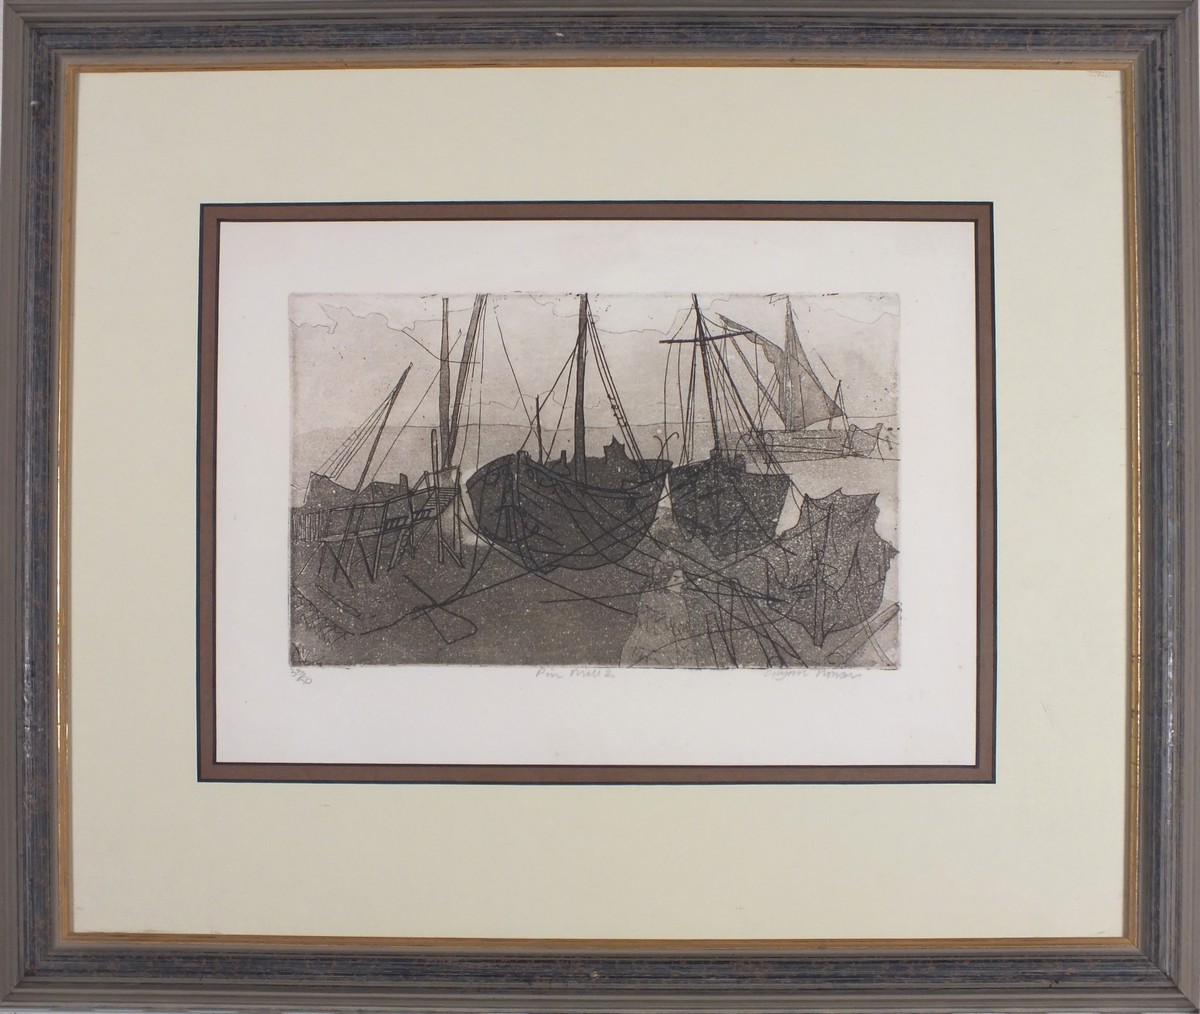 Glynn THOMAS (British b. 1946) Pin Mill 2, Etching, Signed lower right, inscribed and numbered 33/